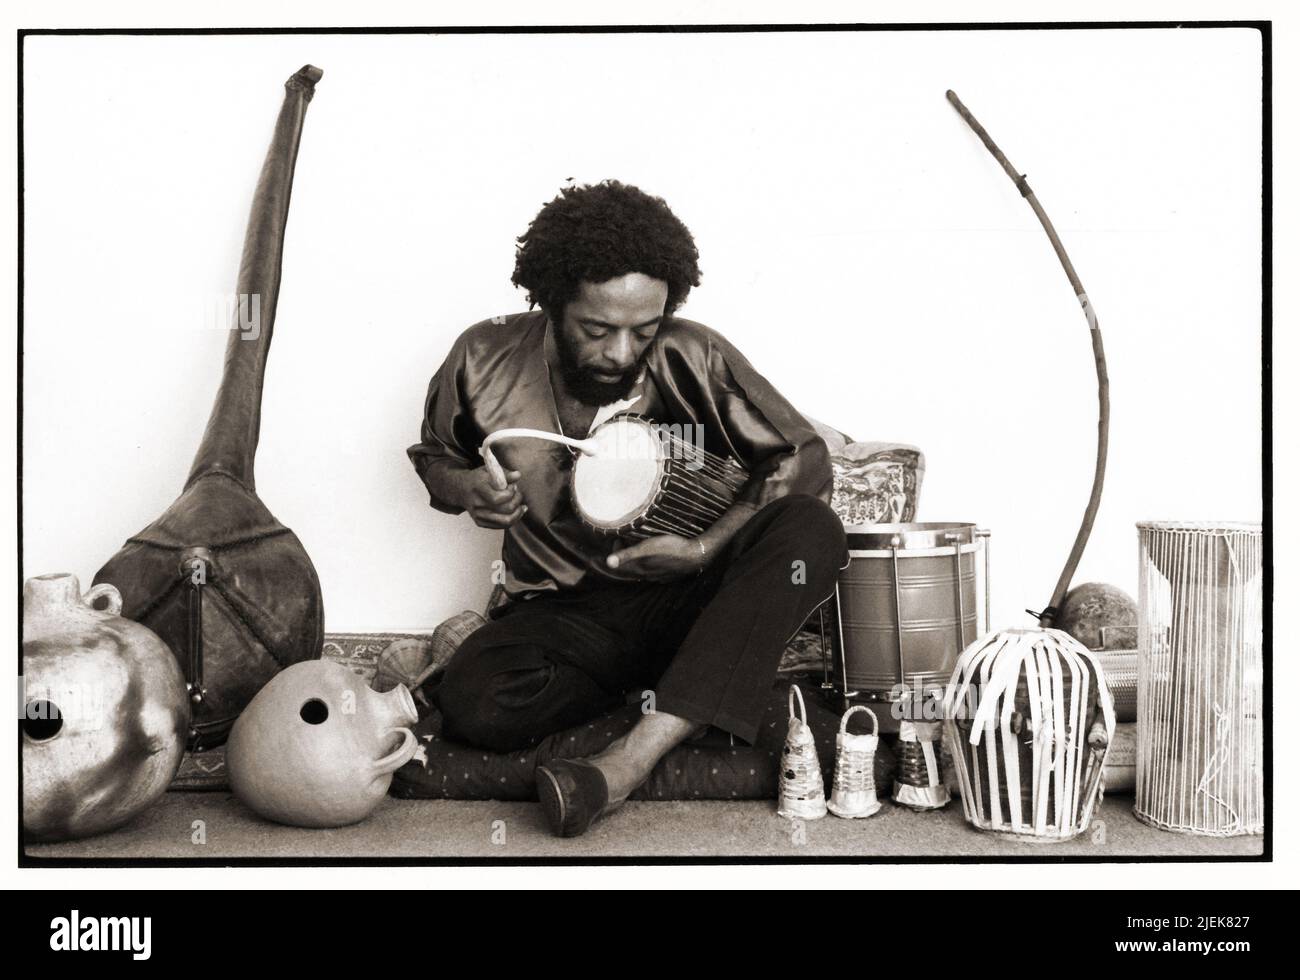 A 1983 posed portrait of Nana Vasconcelos, Brazilian jazz percussionist, playing the dondo talking drum with a curved stick. In New York City. Stock Photo